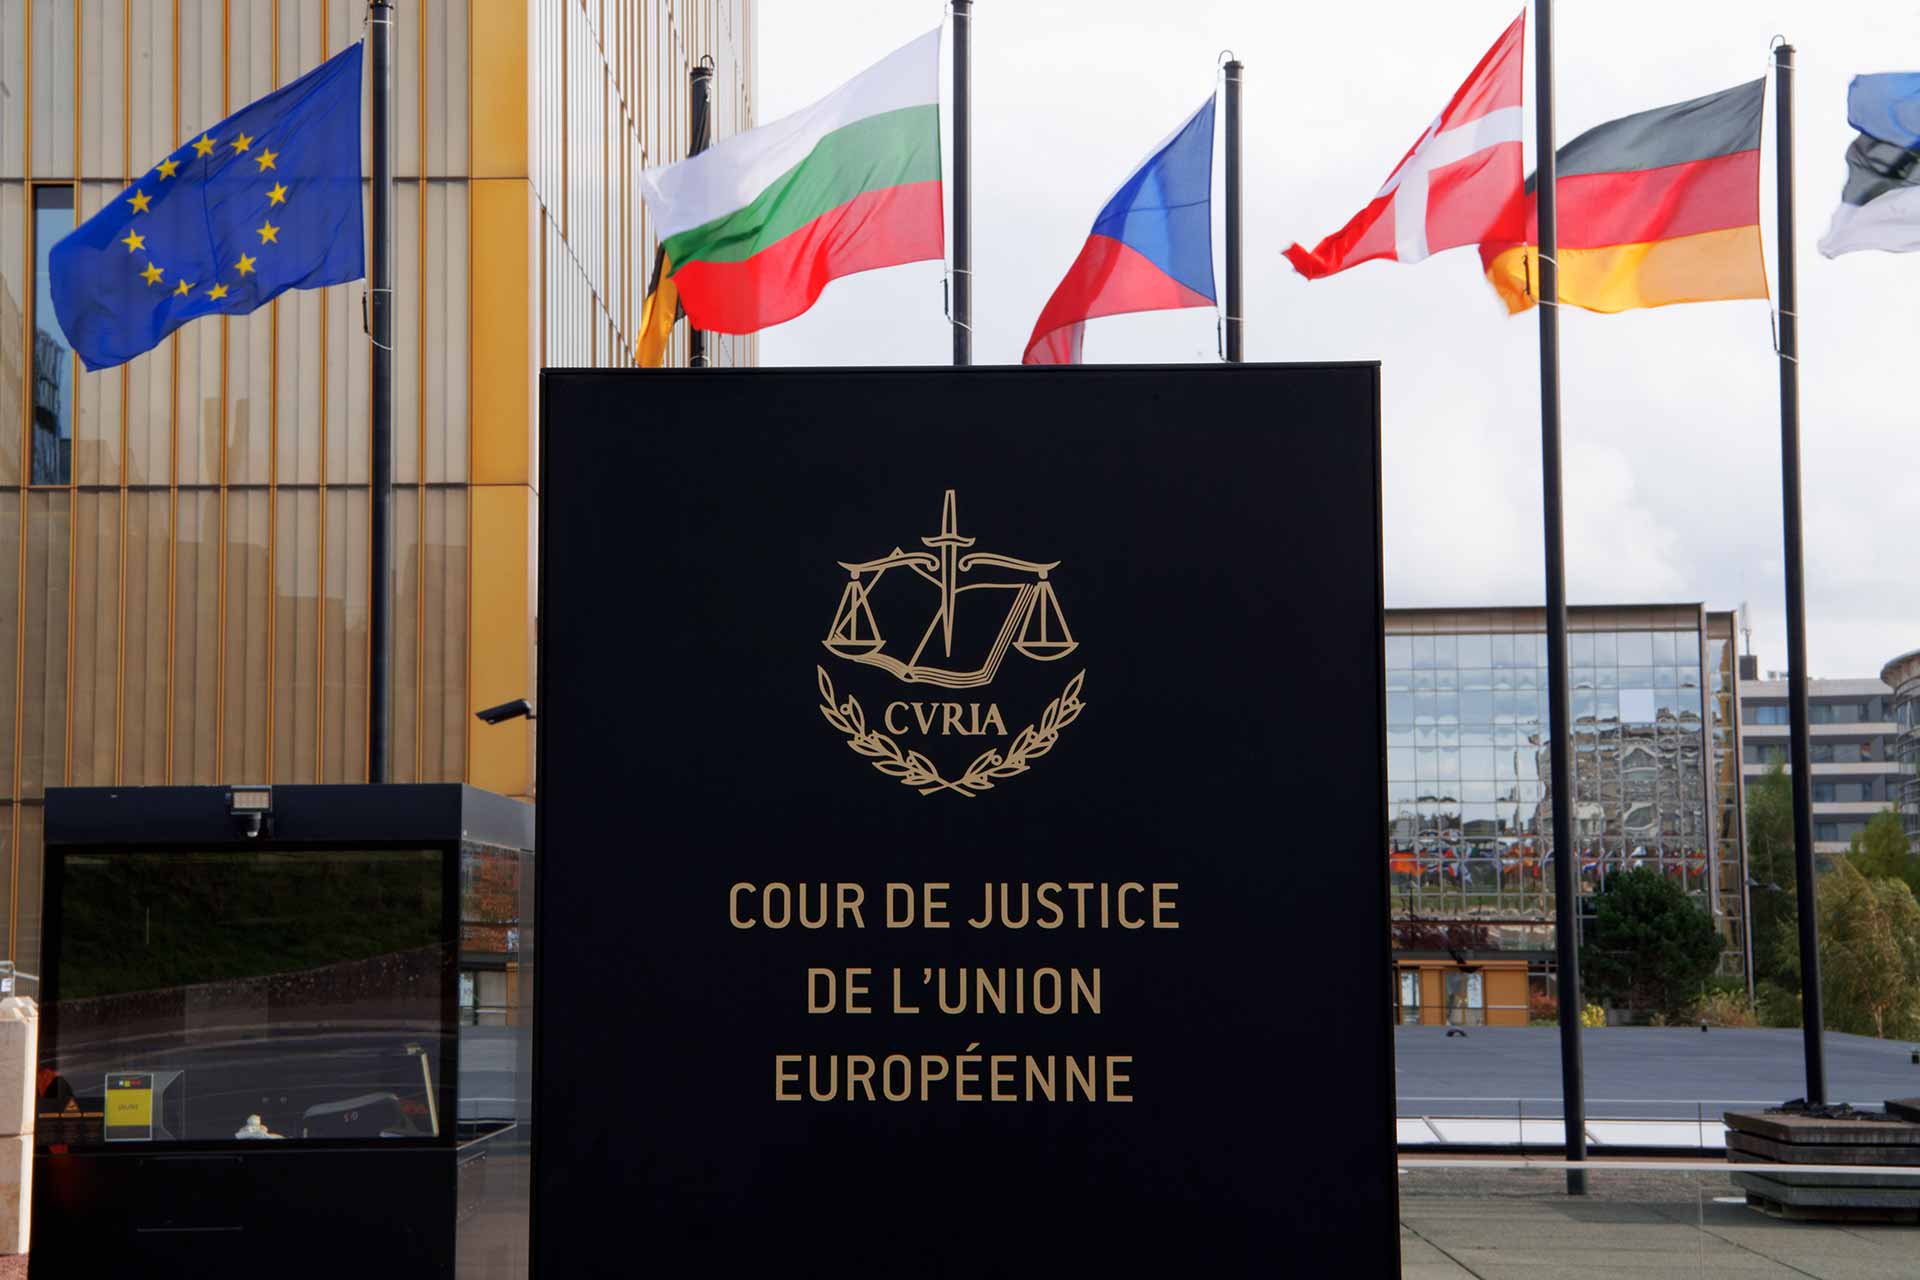 The Court of Justice of the European Union